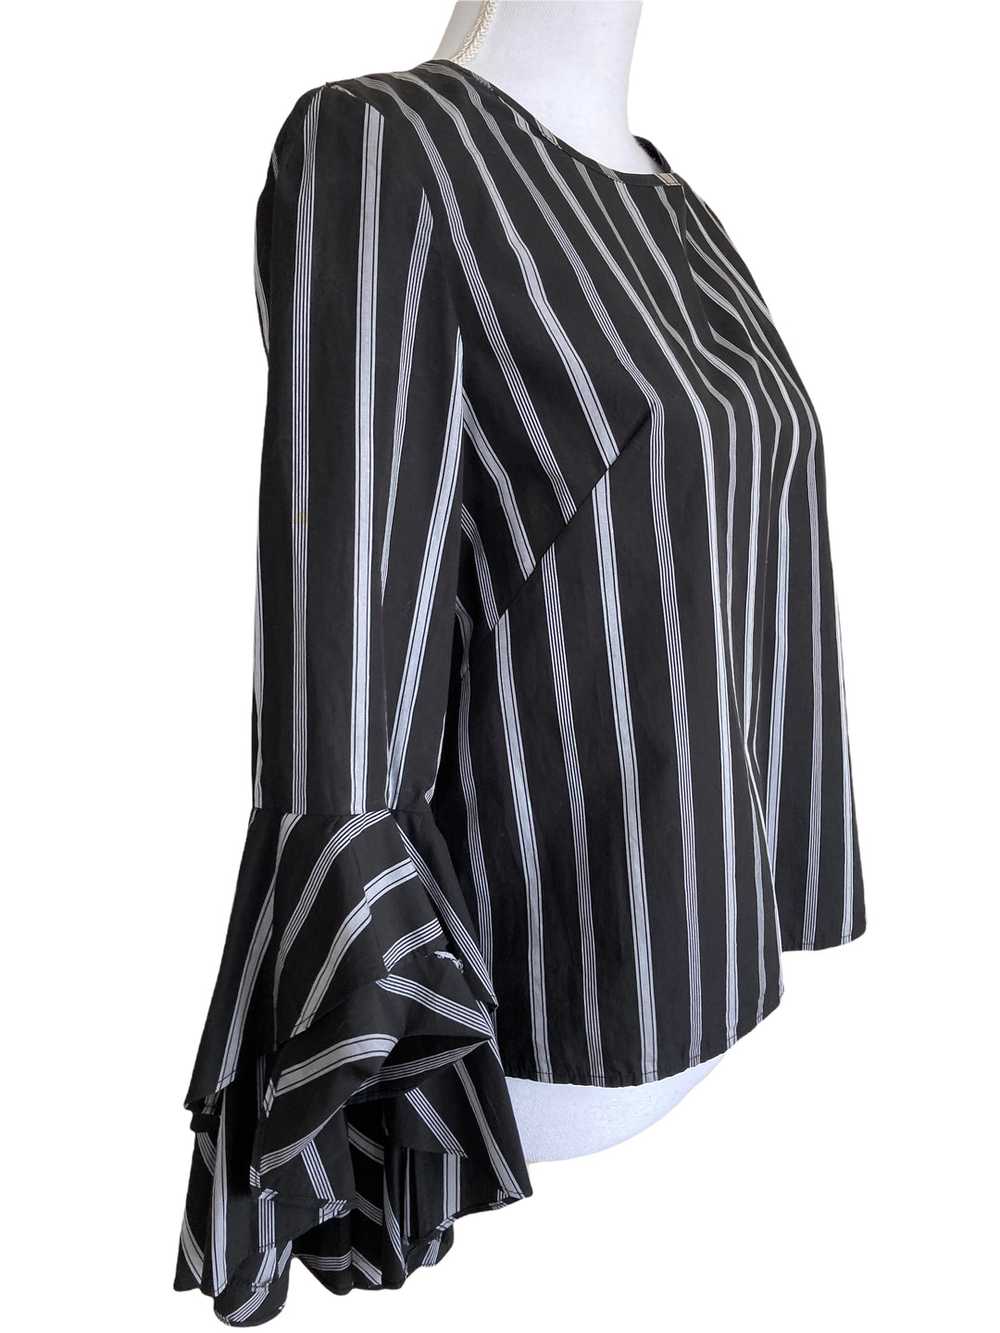 Milly Black and White Bell Sleeve Top, 8 - image 3